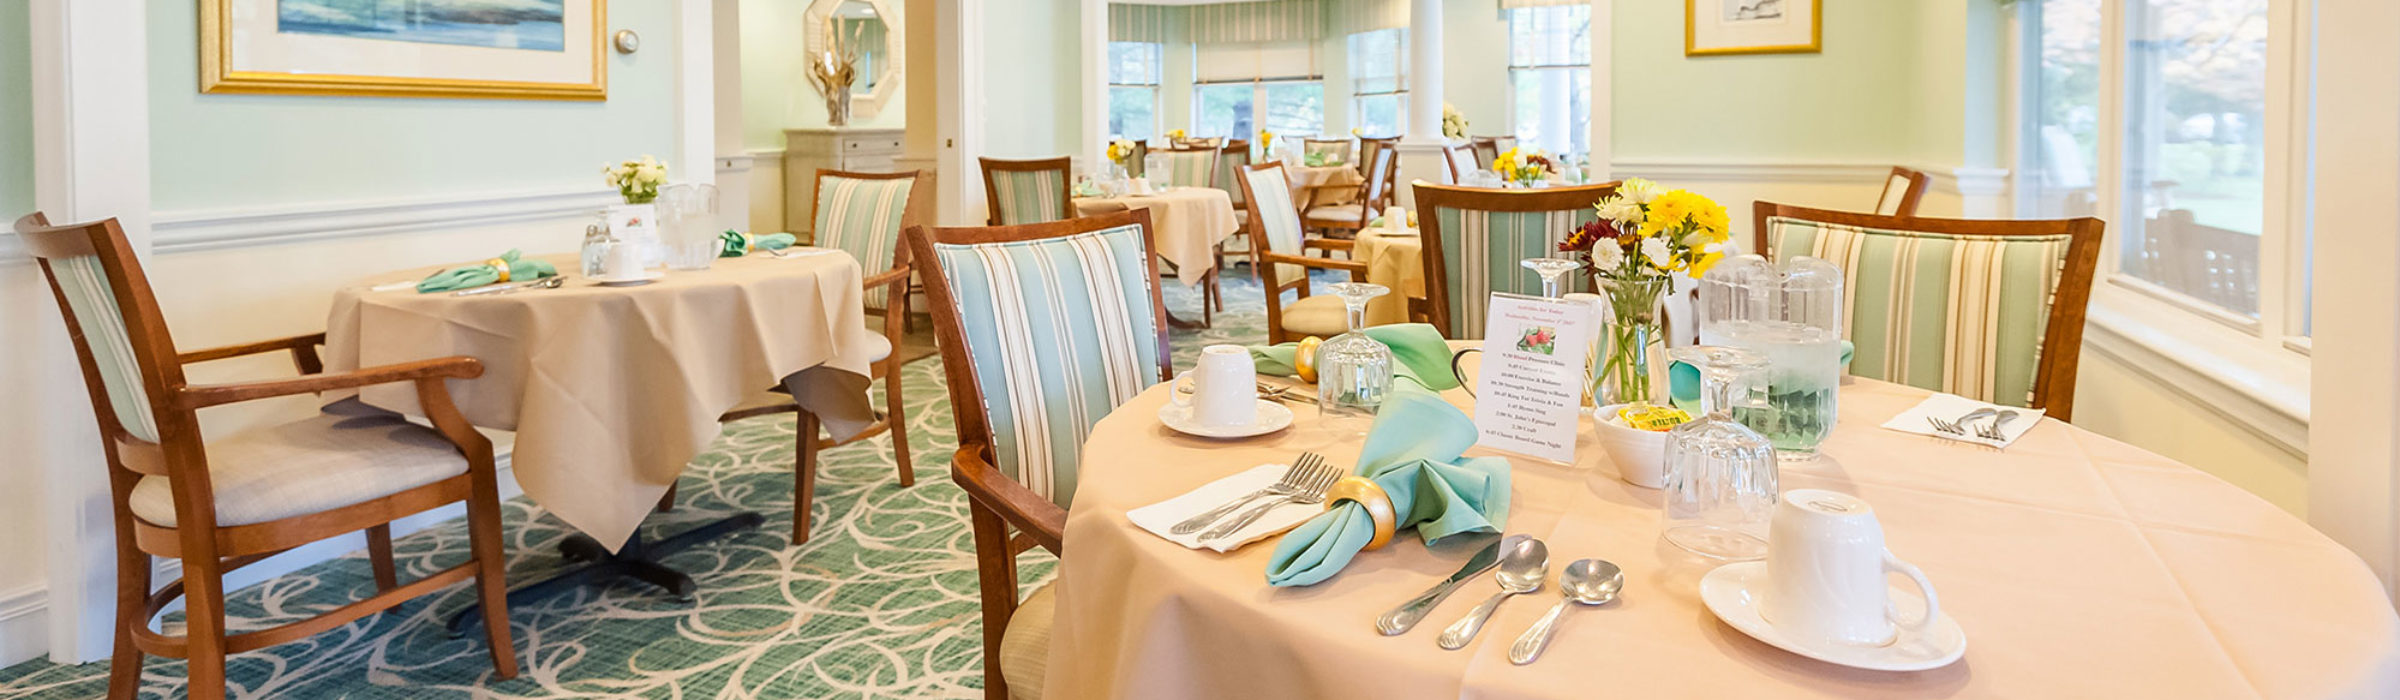 Bright dining room in a Welch Senior Living community